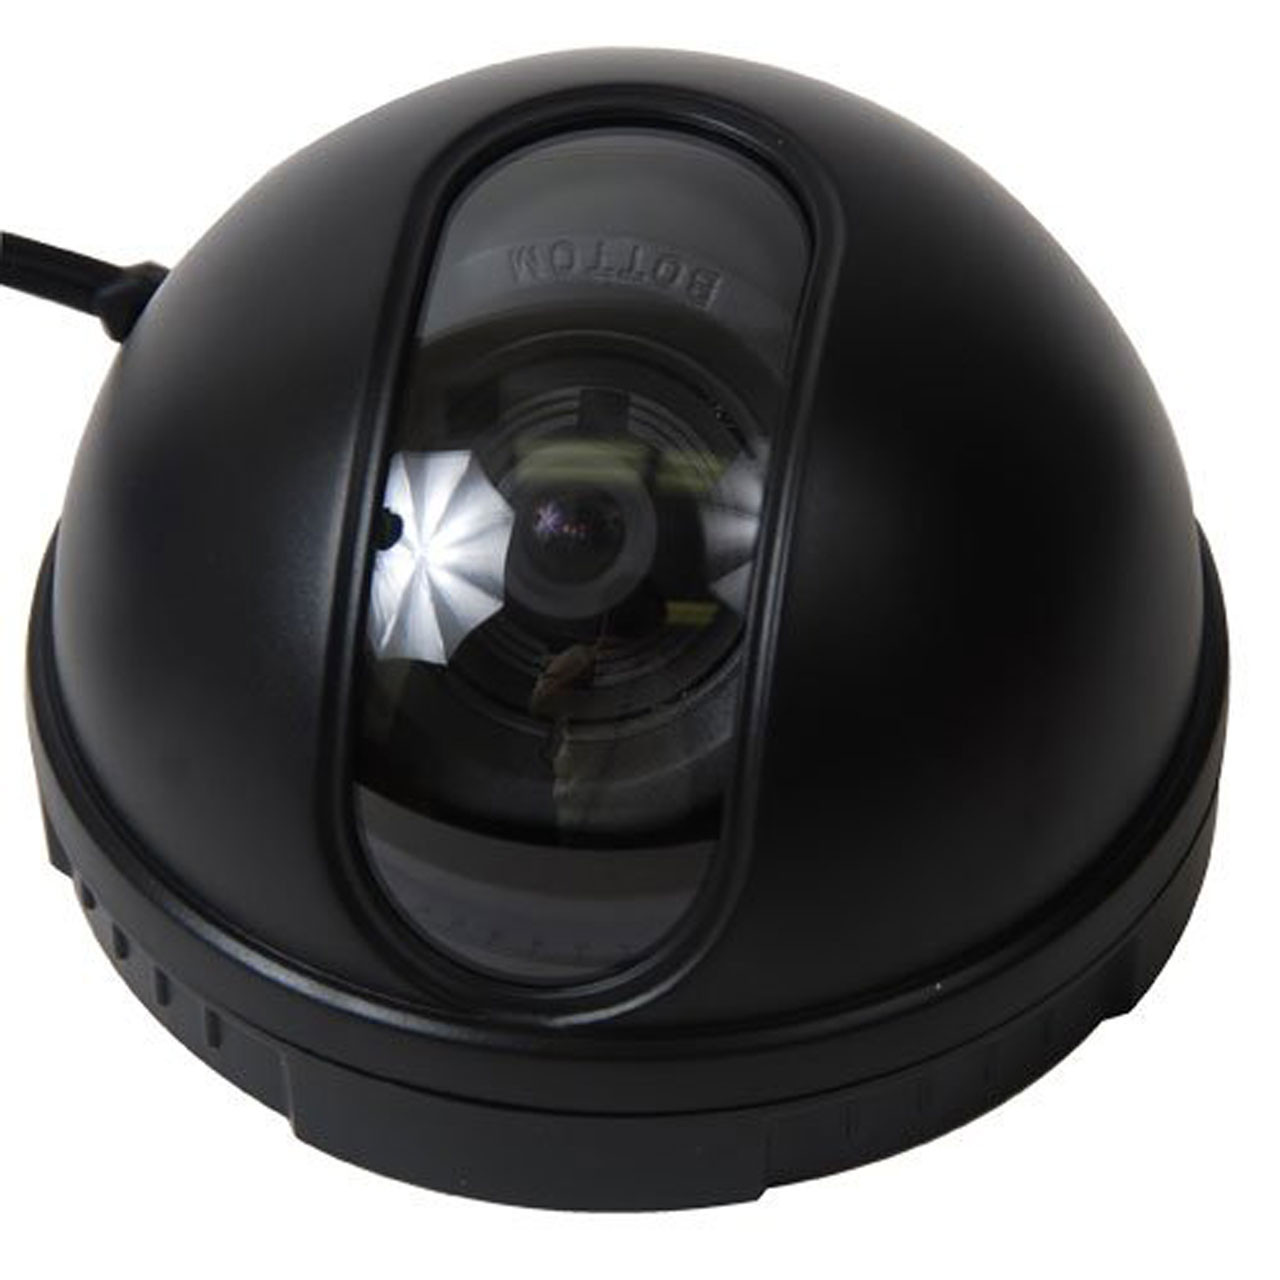 dome camera images